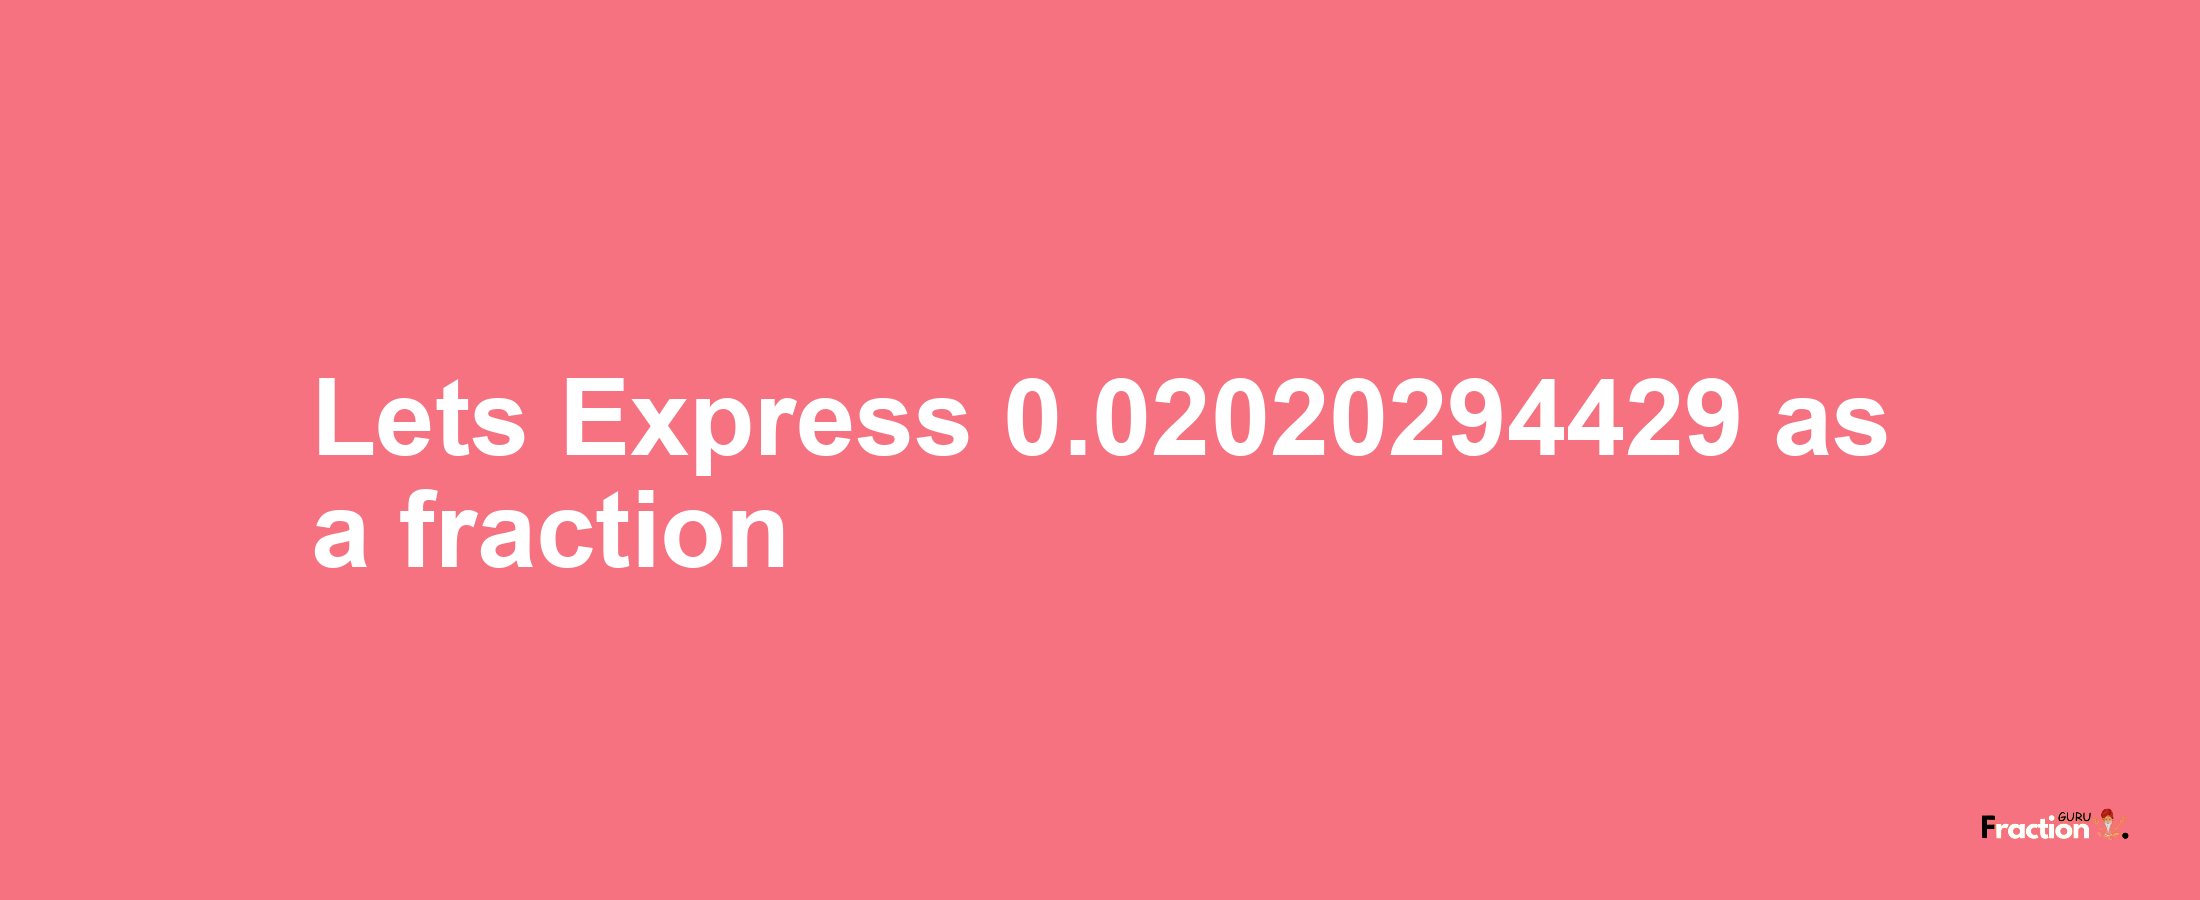 Lets Express 0.02020294429 as afraction